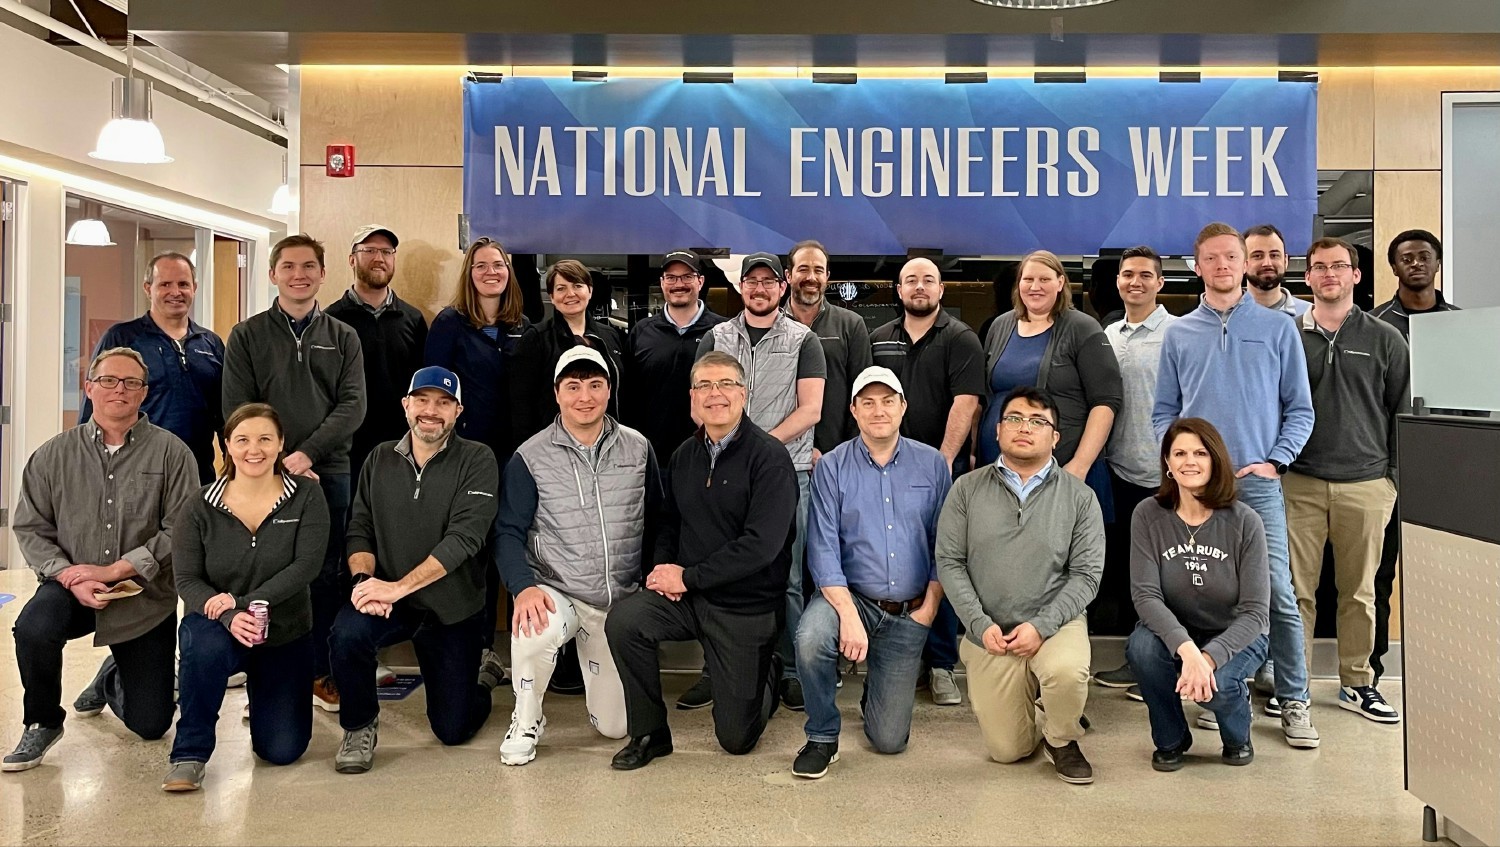 Each year Team Ruby celebrates National Engineers Week with daily games, catered lunches, swag, and other goodies.